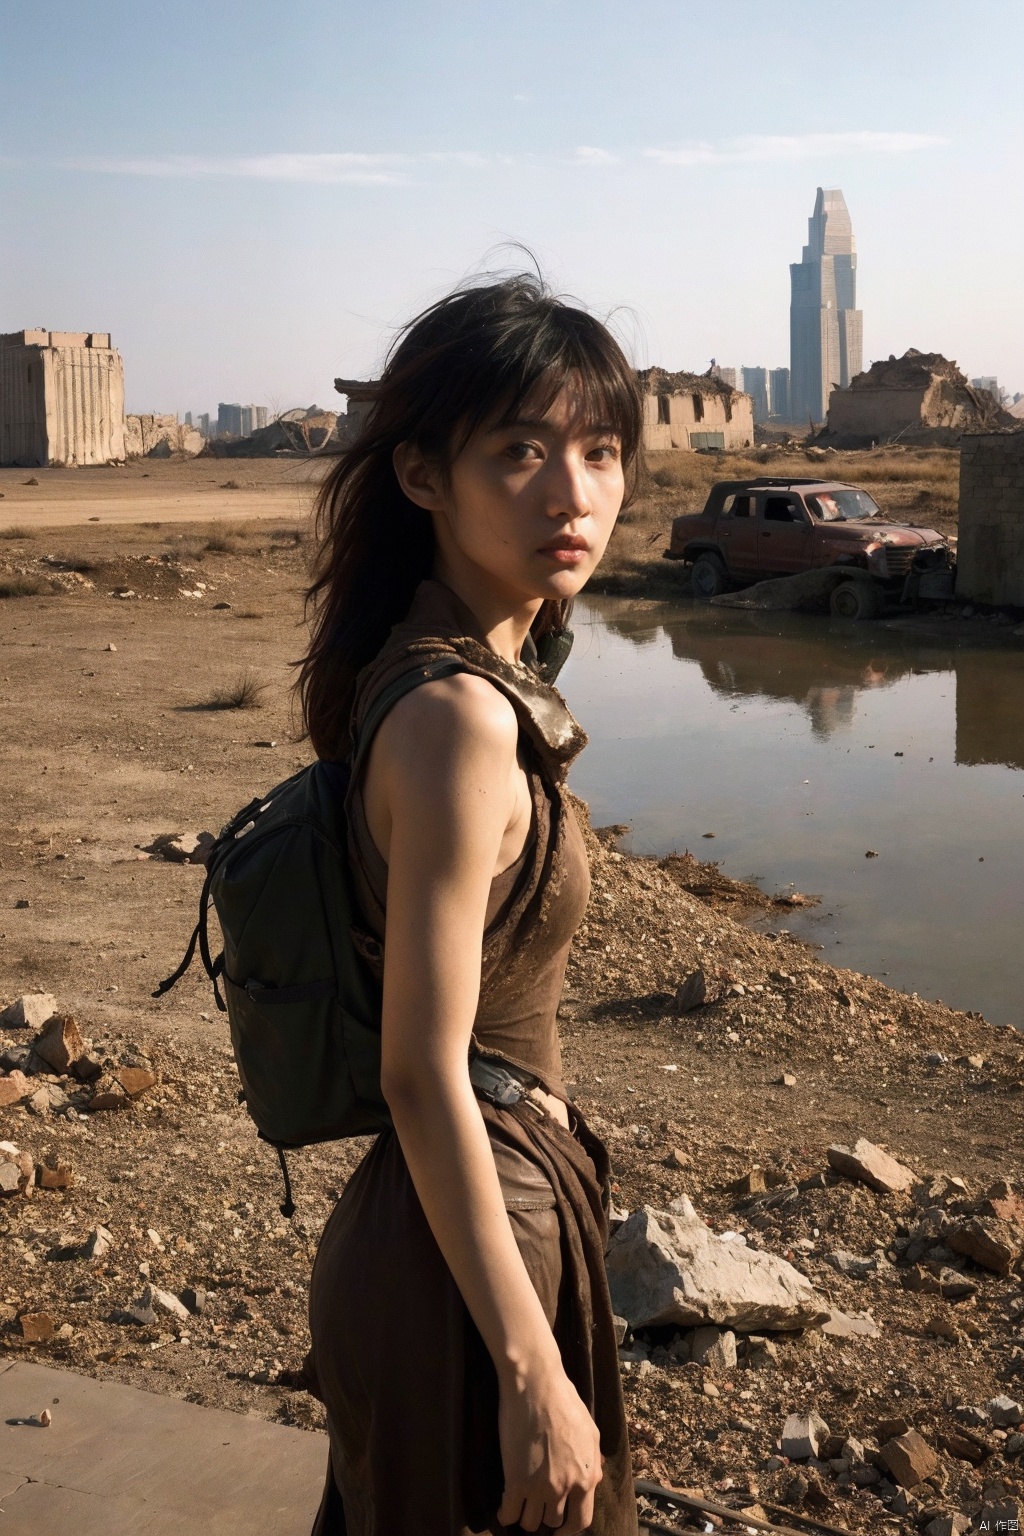  Envision a low-poly game art featuring a solitary girl in a post-apocalyptic setting. She's a survivor,dressed in makeshift armor crafted from remnants of the old world. The background is a desolate urban landscape,with crumbling buildings and abandoned vehicles. The scene is tinged with hues of orange and red,reflecting the harshness of the environment. She carries a backpack full of scavenged supplies,her expression one of resilience and hope amidst the ruins,(film grain:1.2),